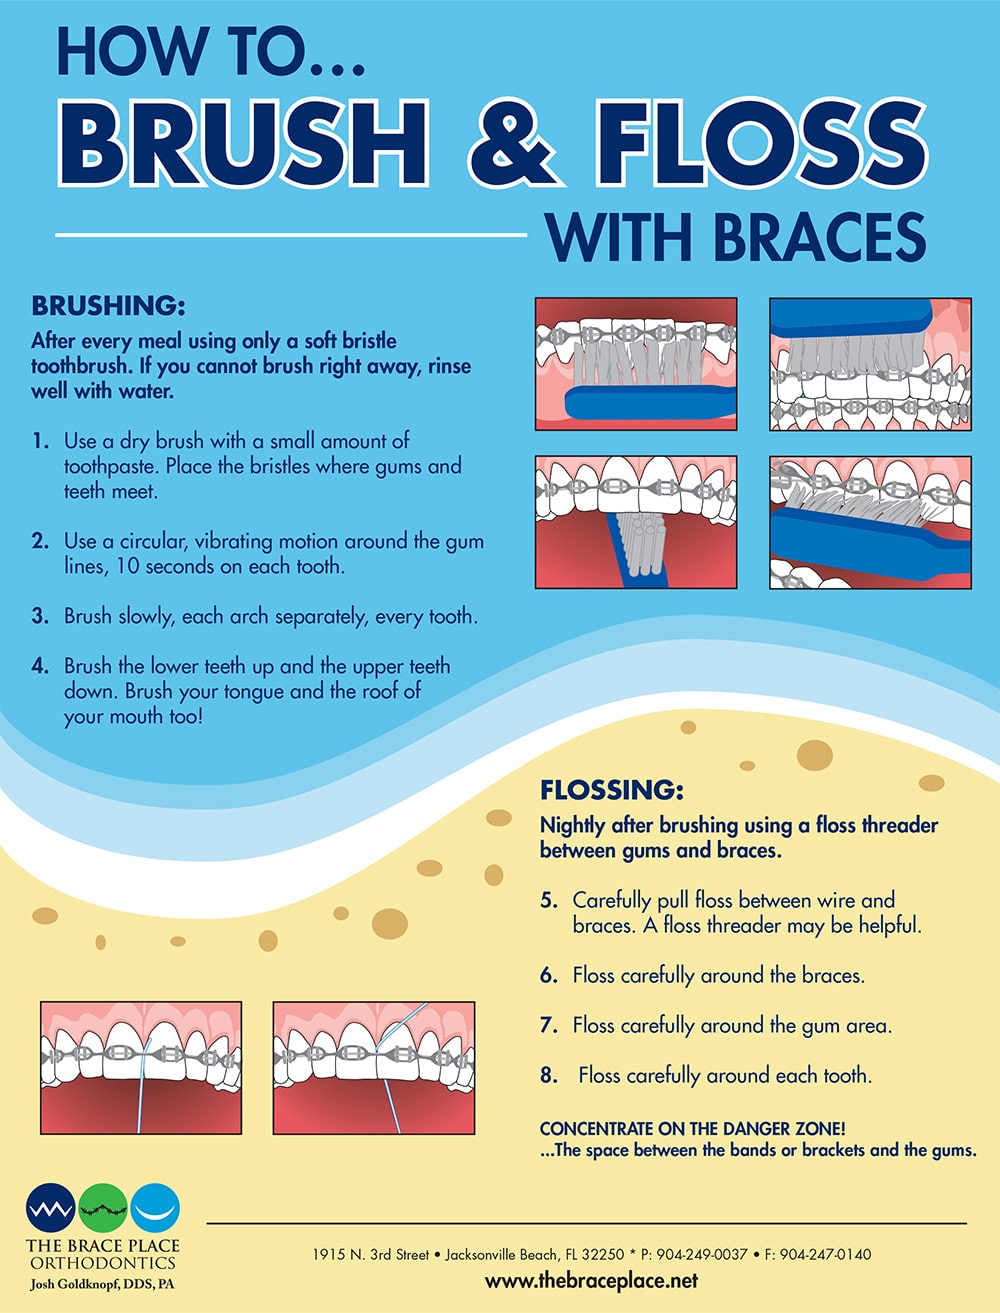 Flossing Techniques for Braces: A Step-by-Step Guide